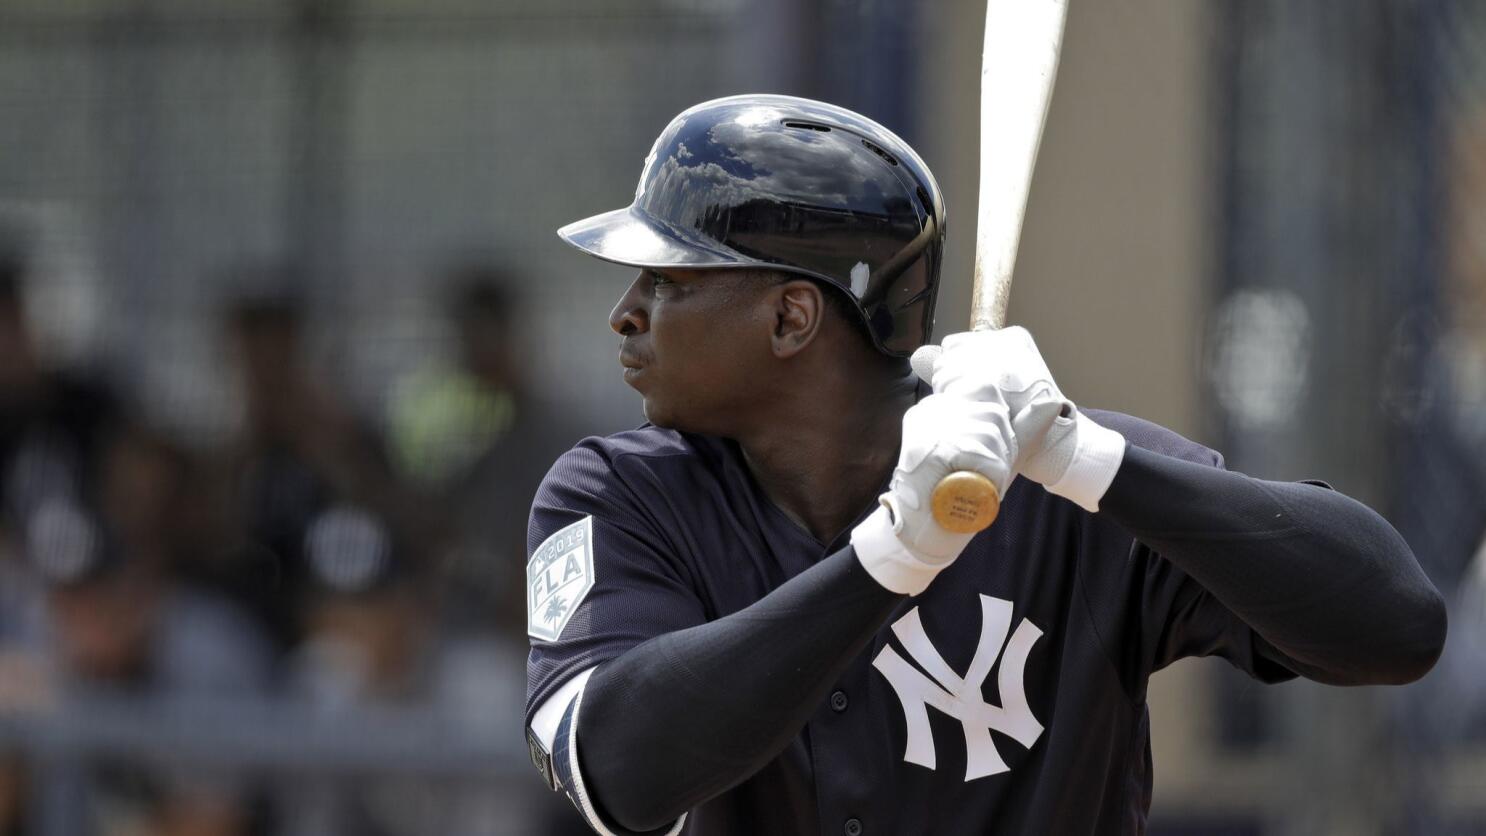 MLB notes: Didi Gregorius has two hits in first game since Tommy